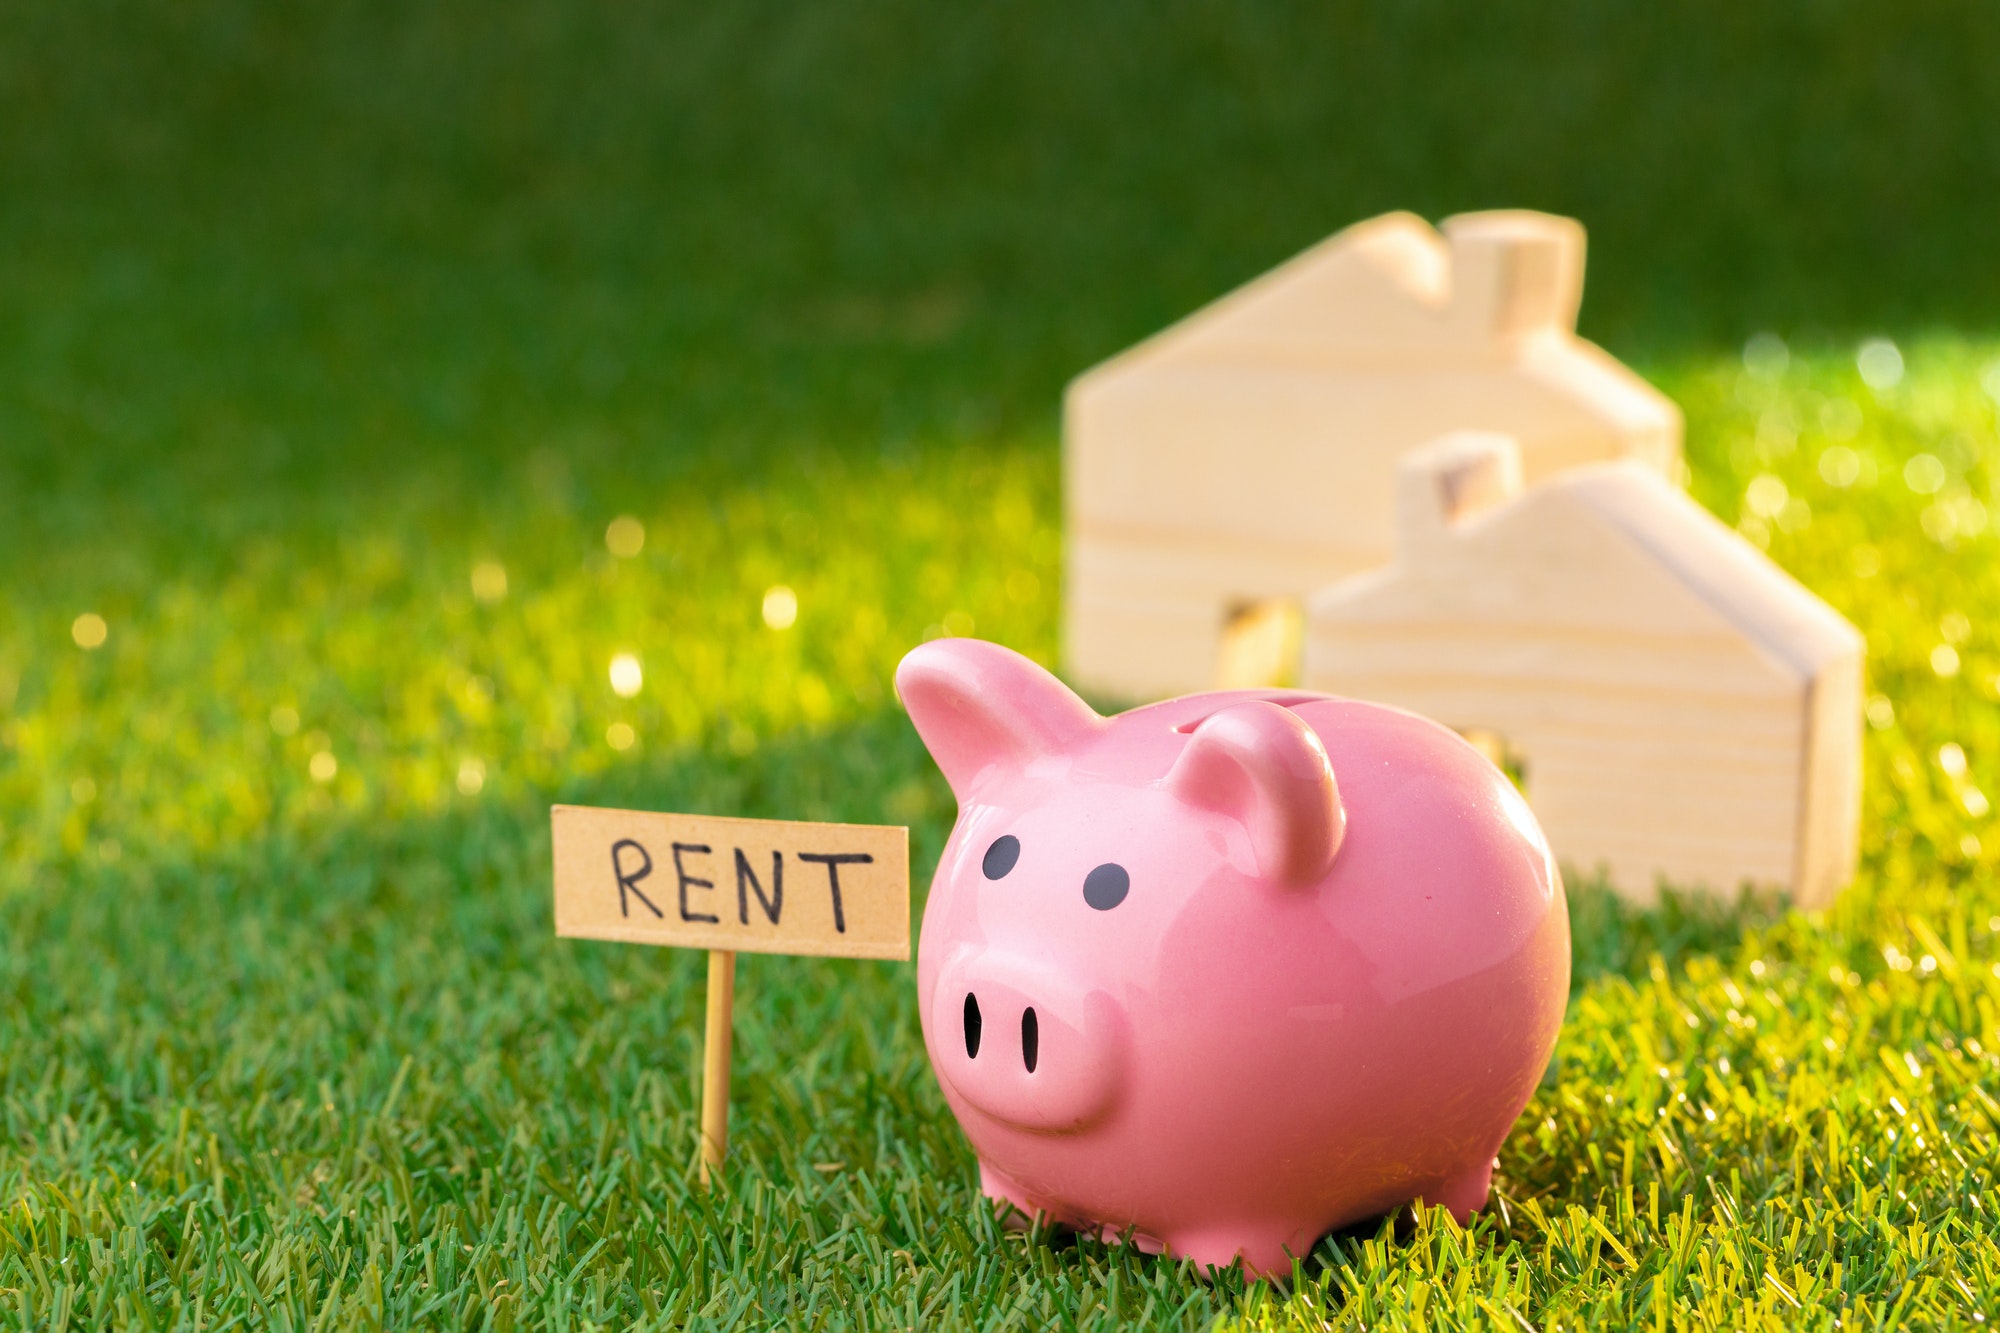 Rental costs fell again in Many